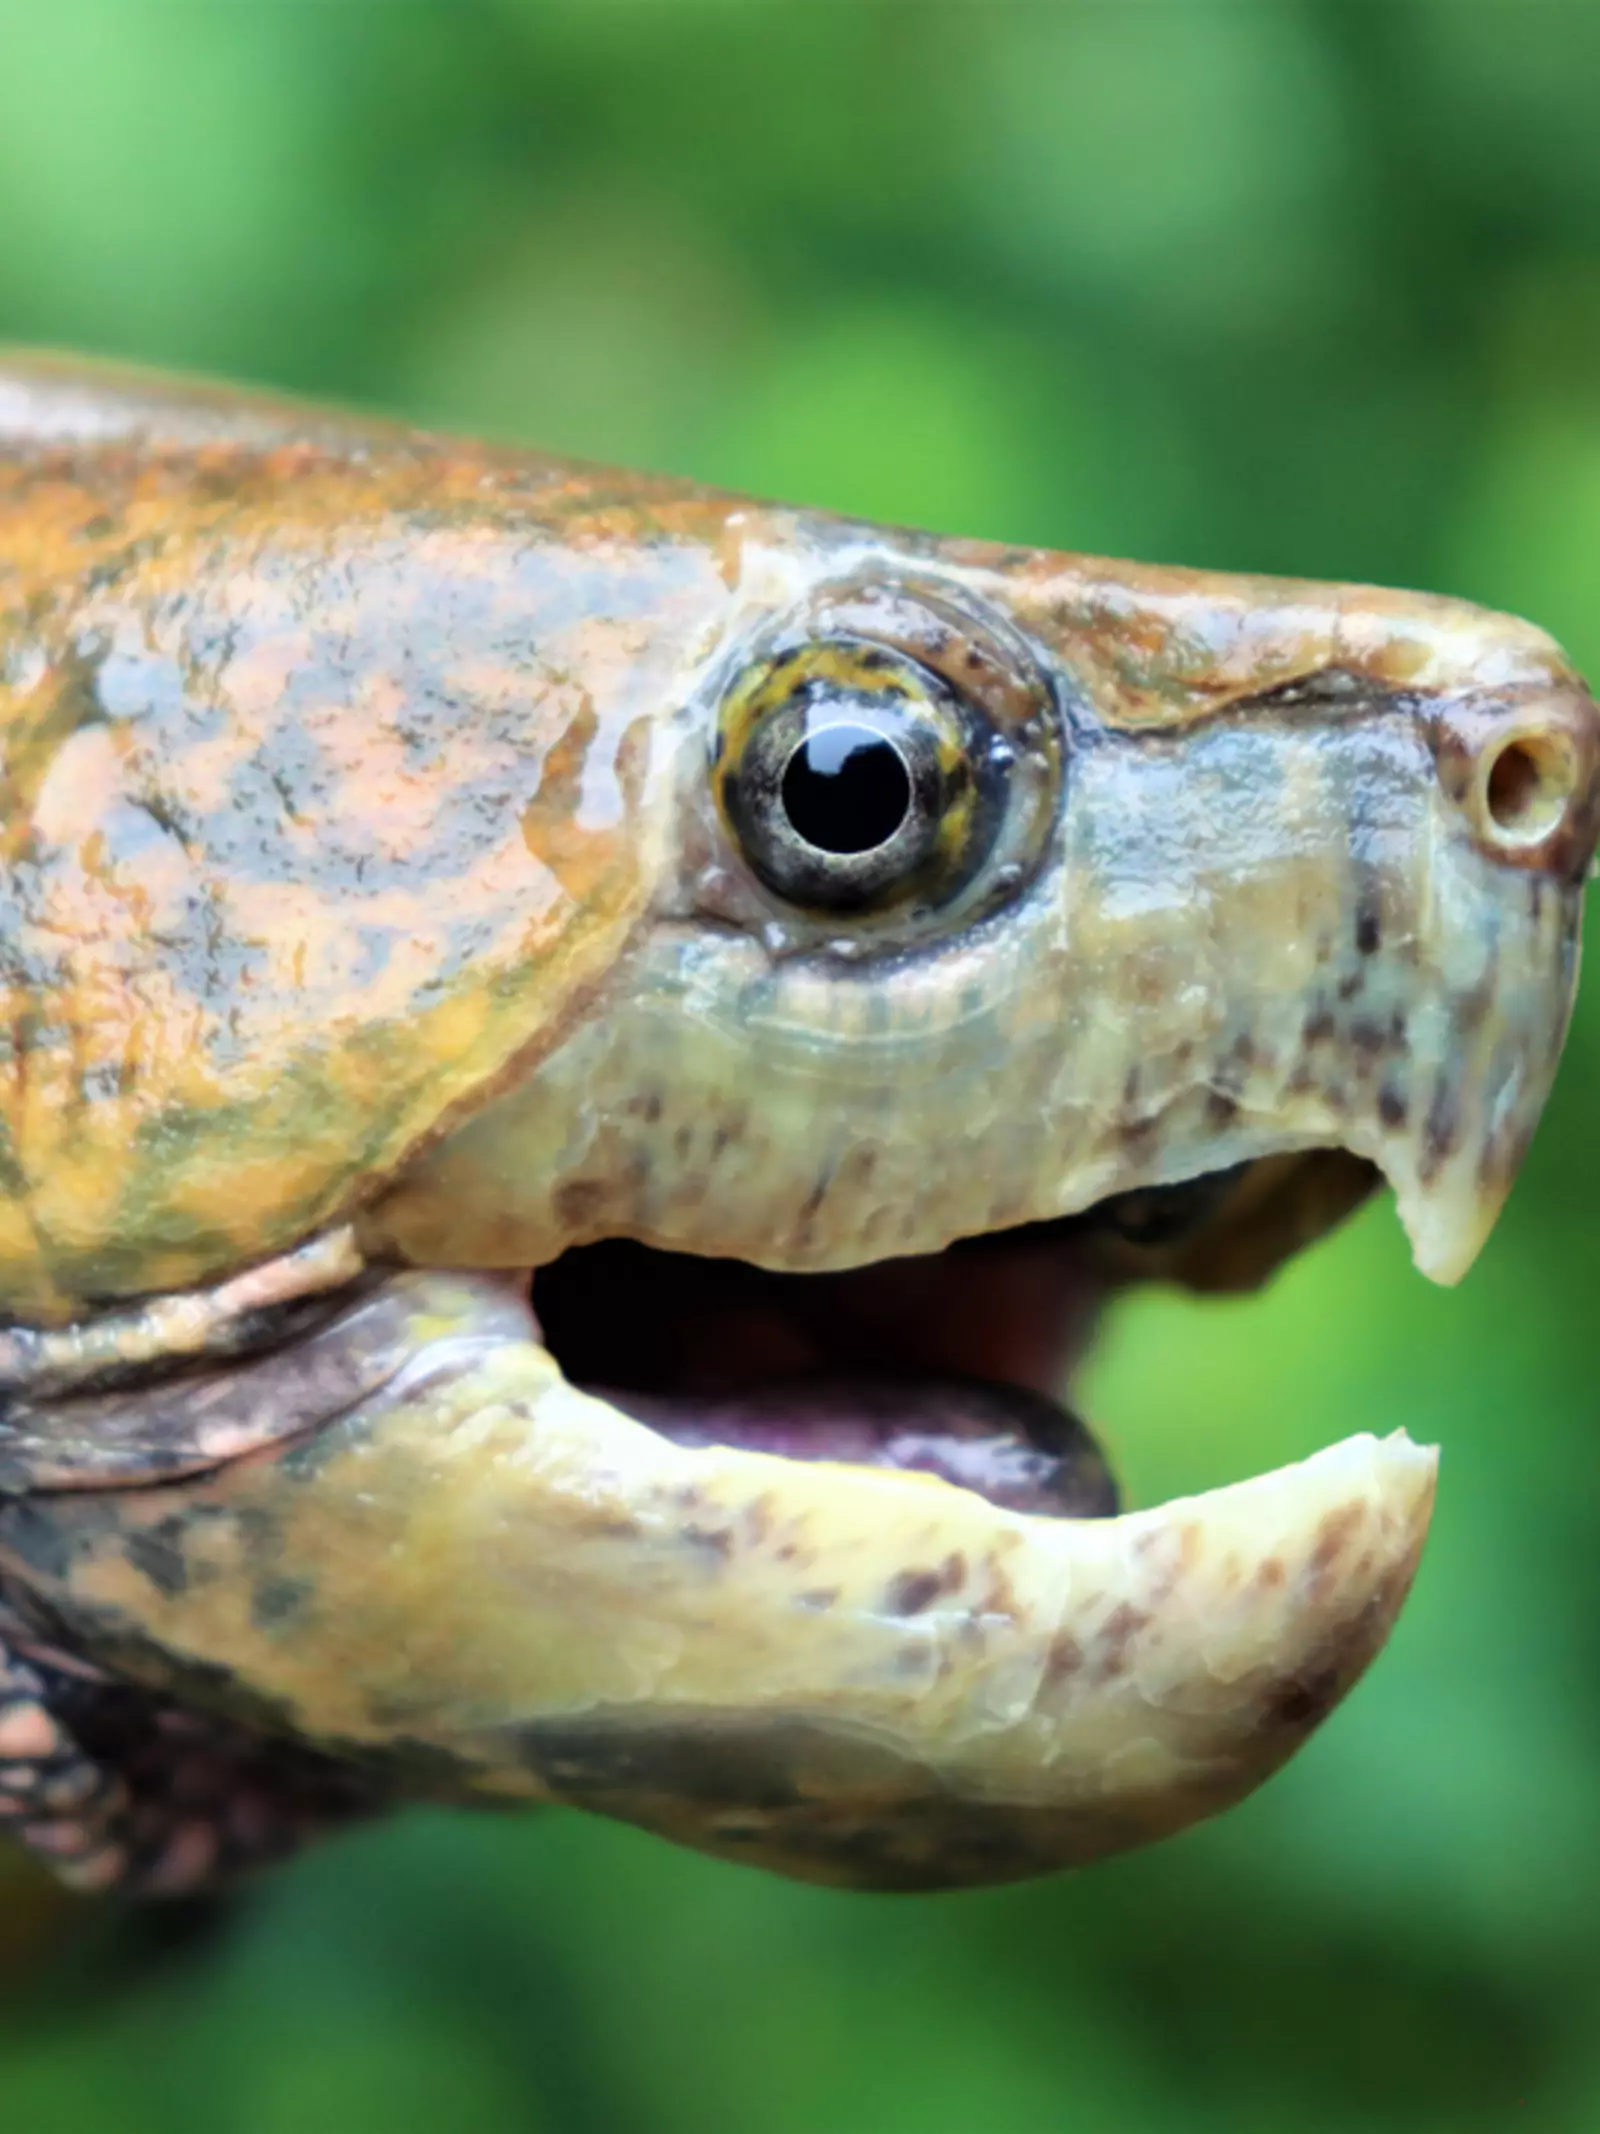 Big-headed turtle close-up with jaws open